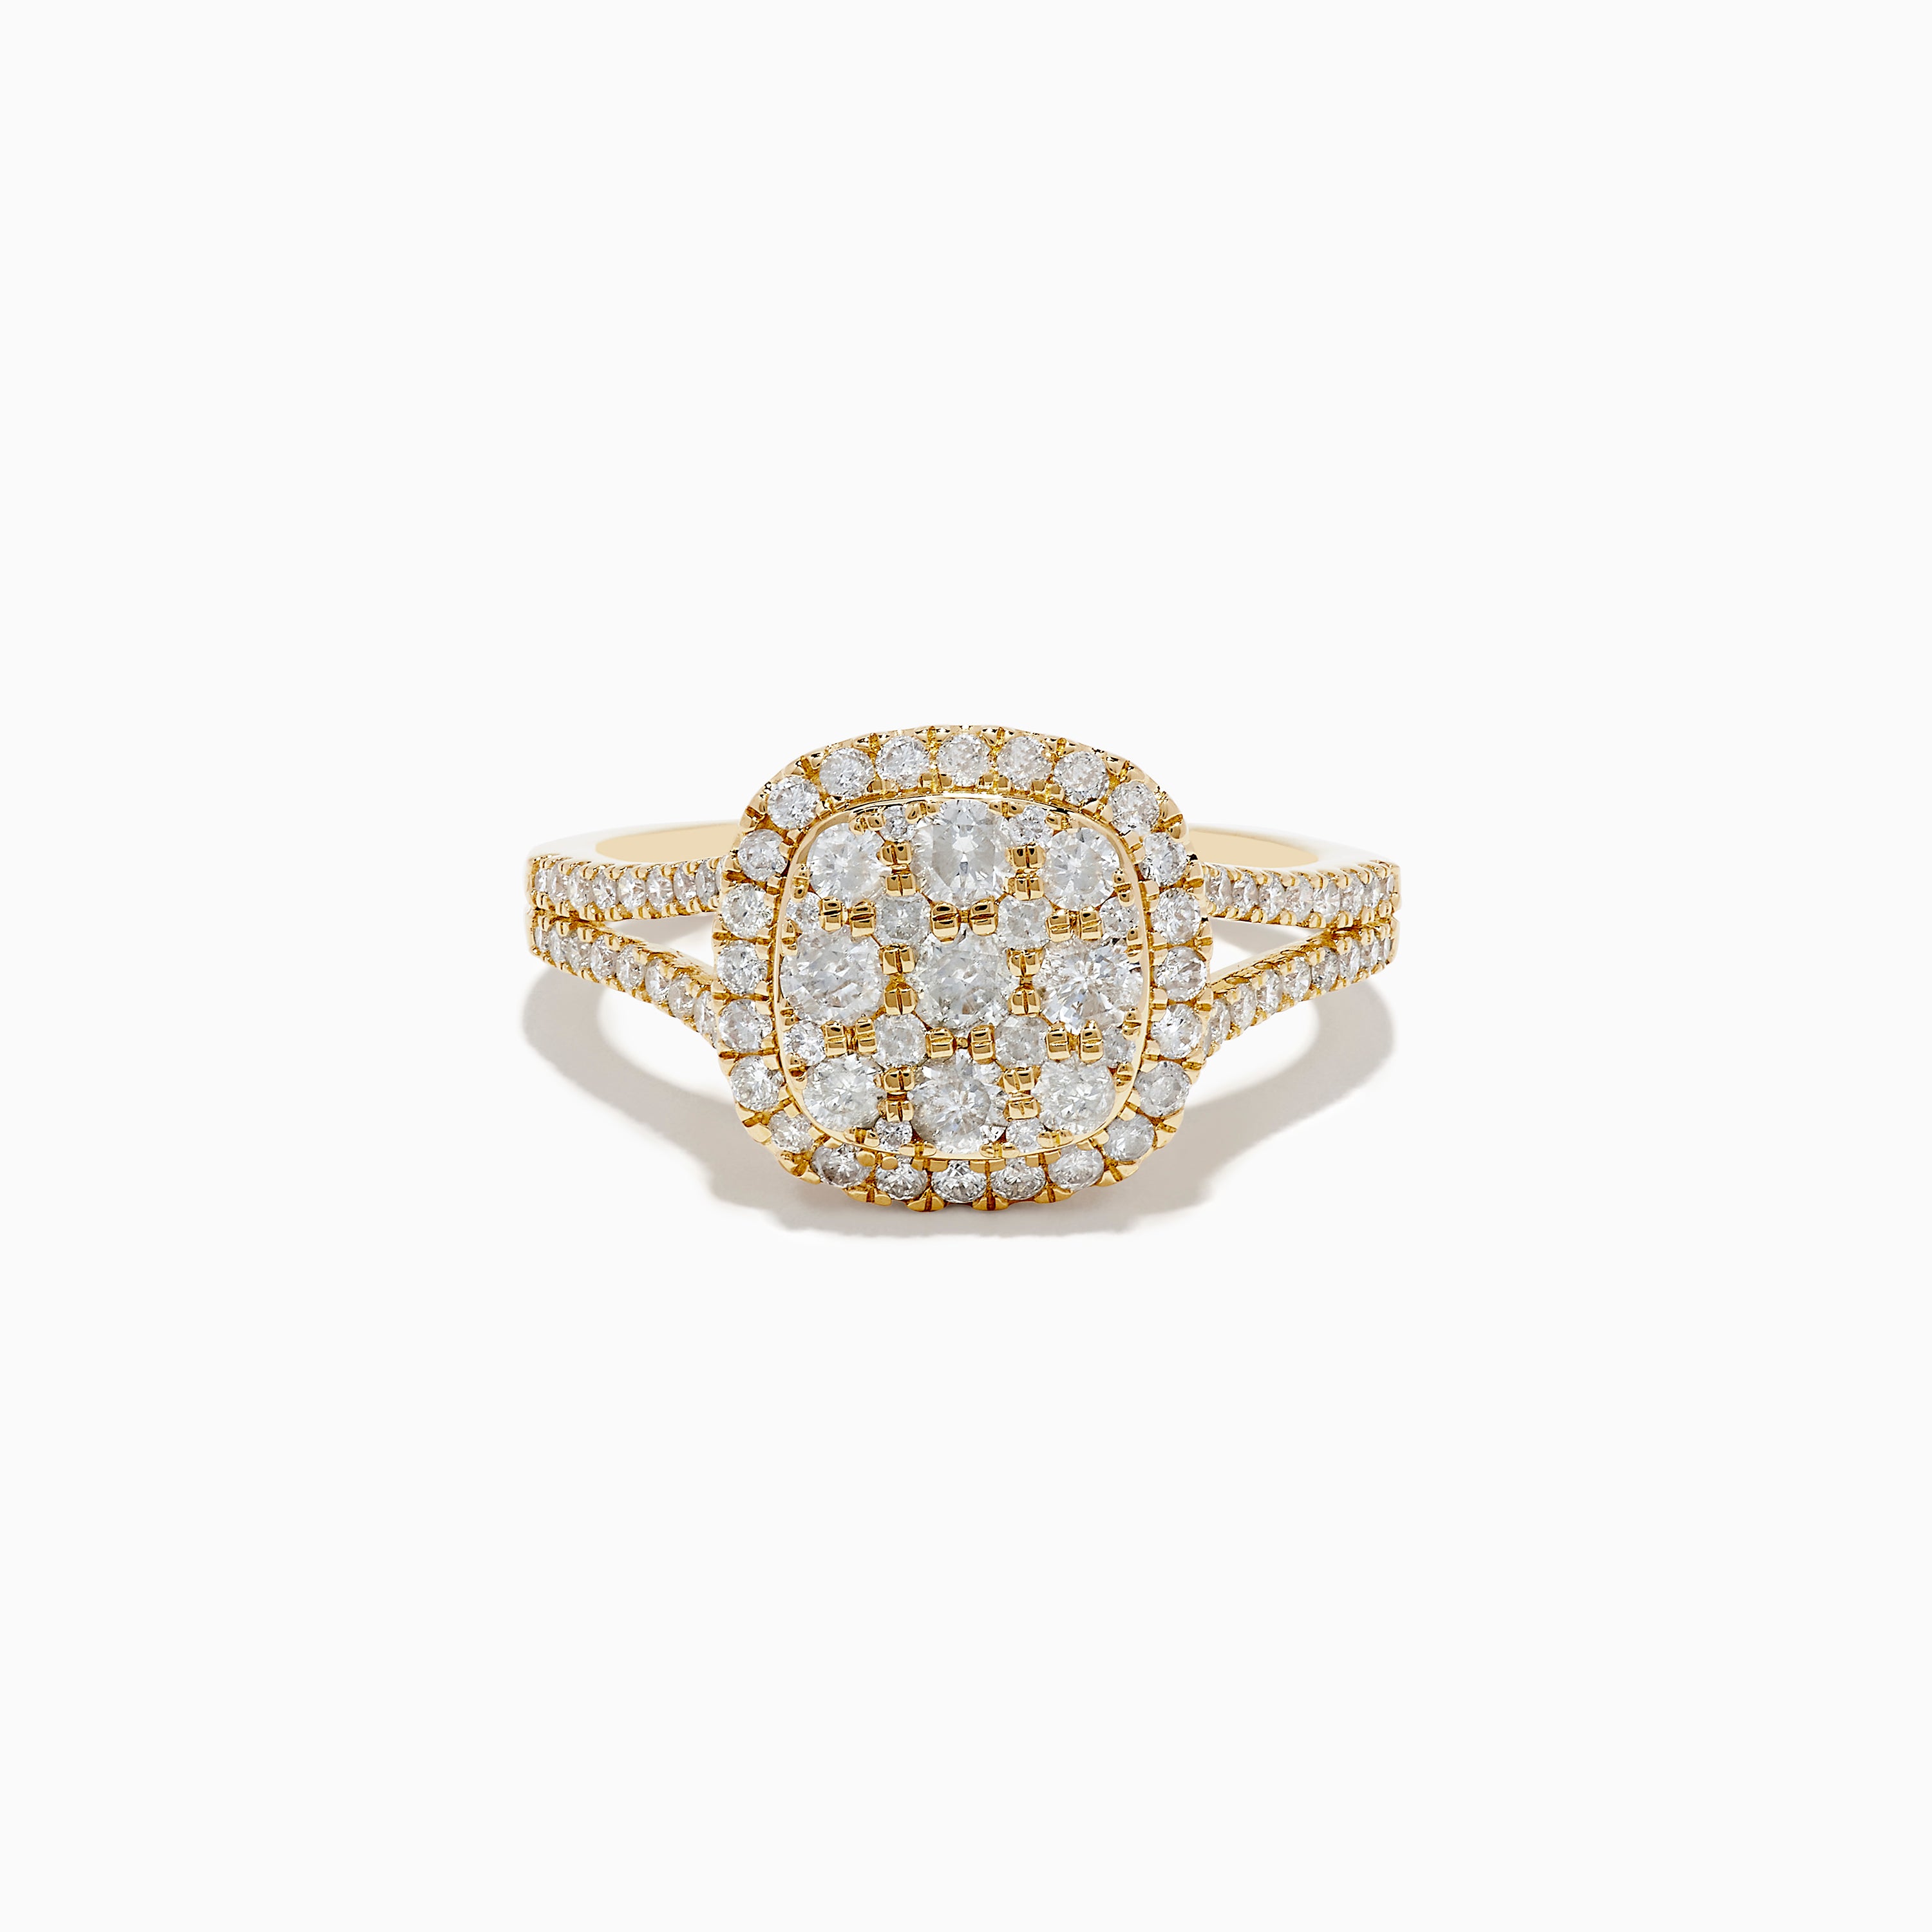 A diamond is forever, but this deal won't last long! ❤️ 14k gold